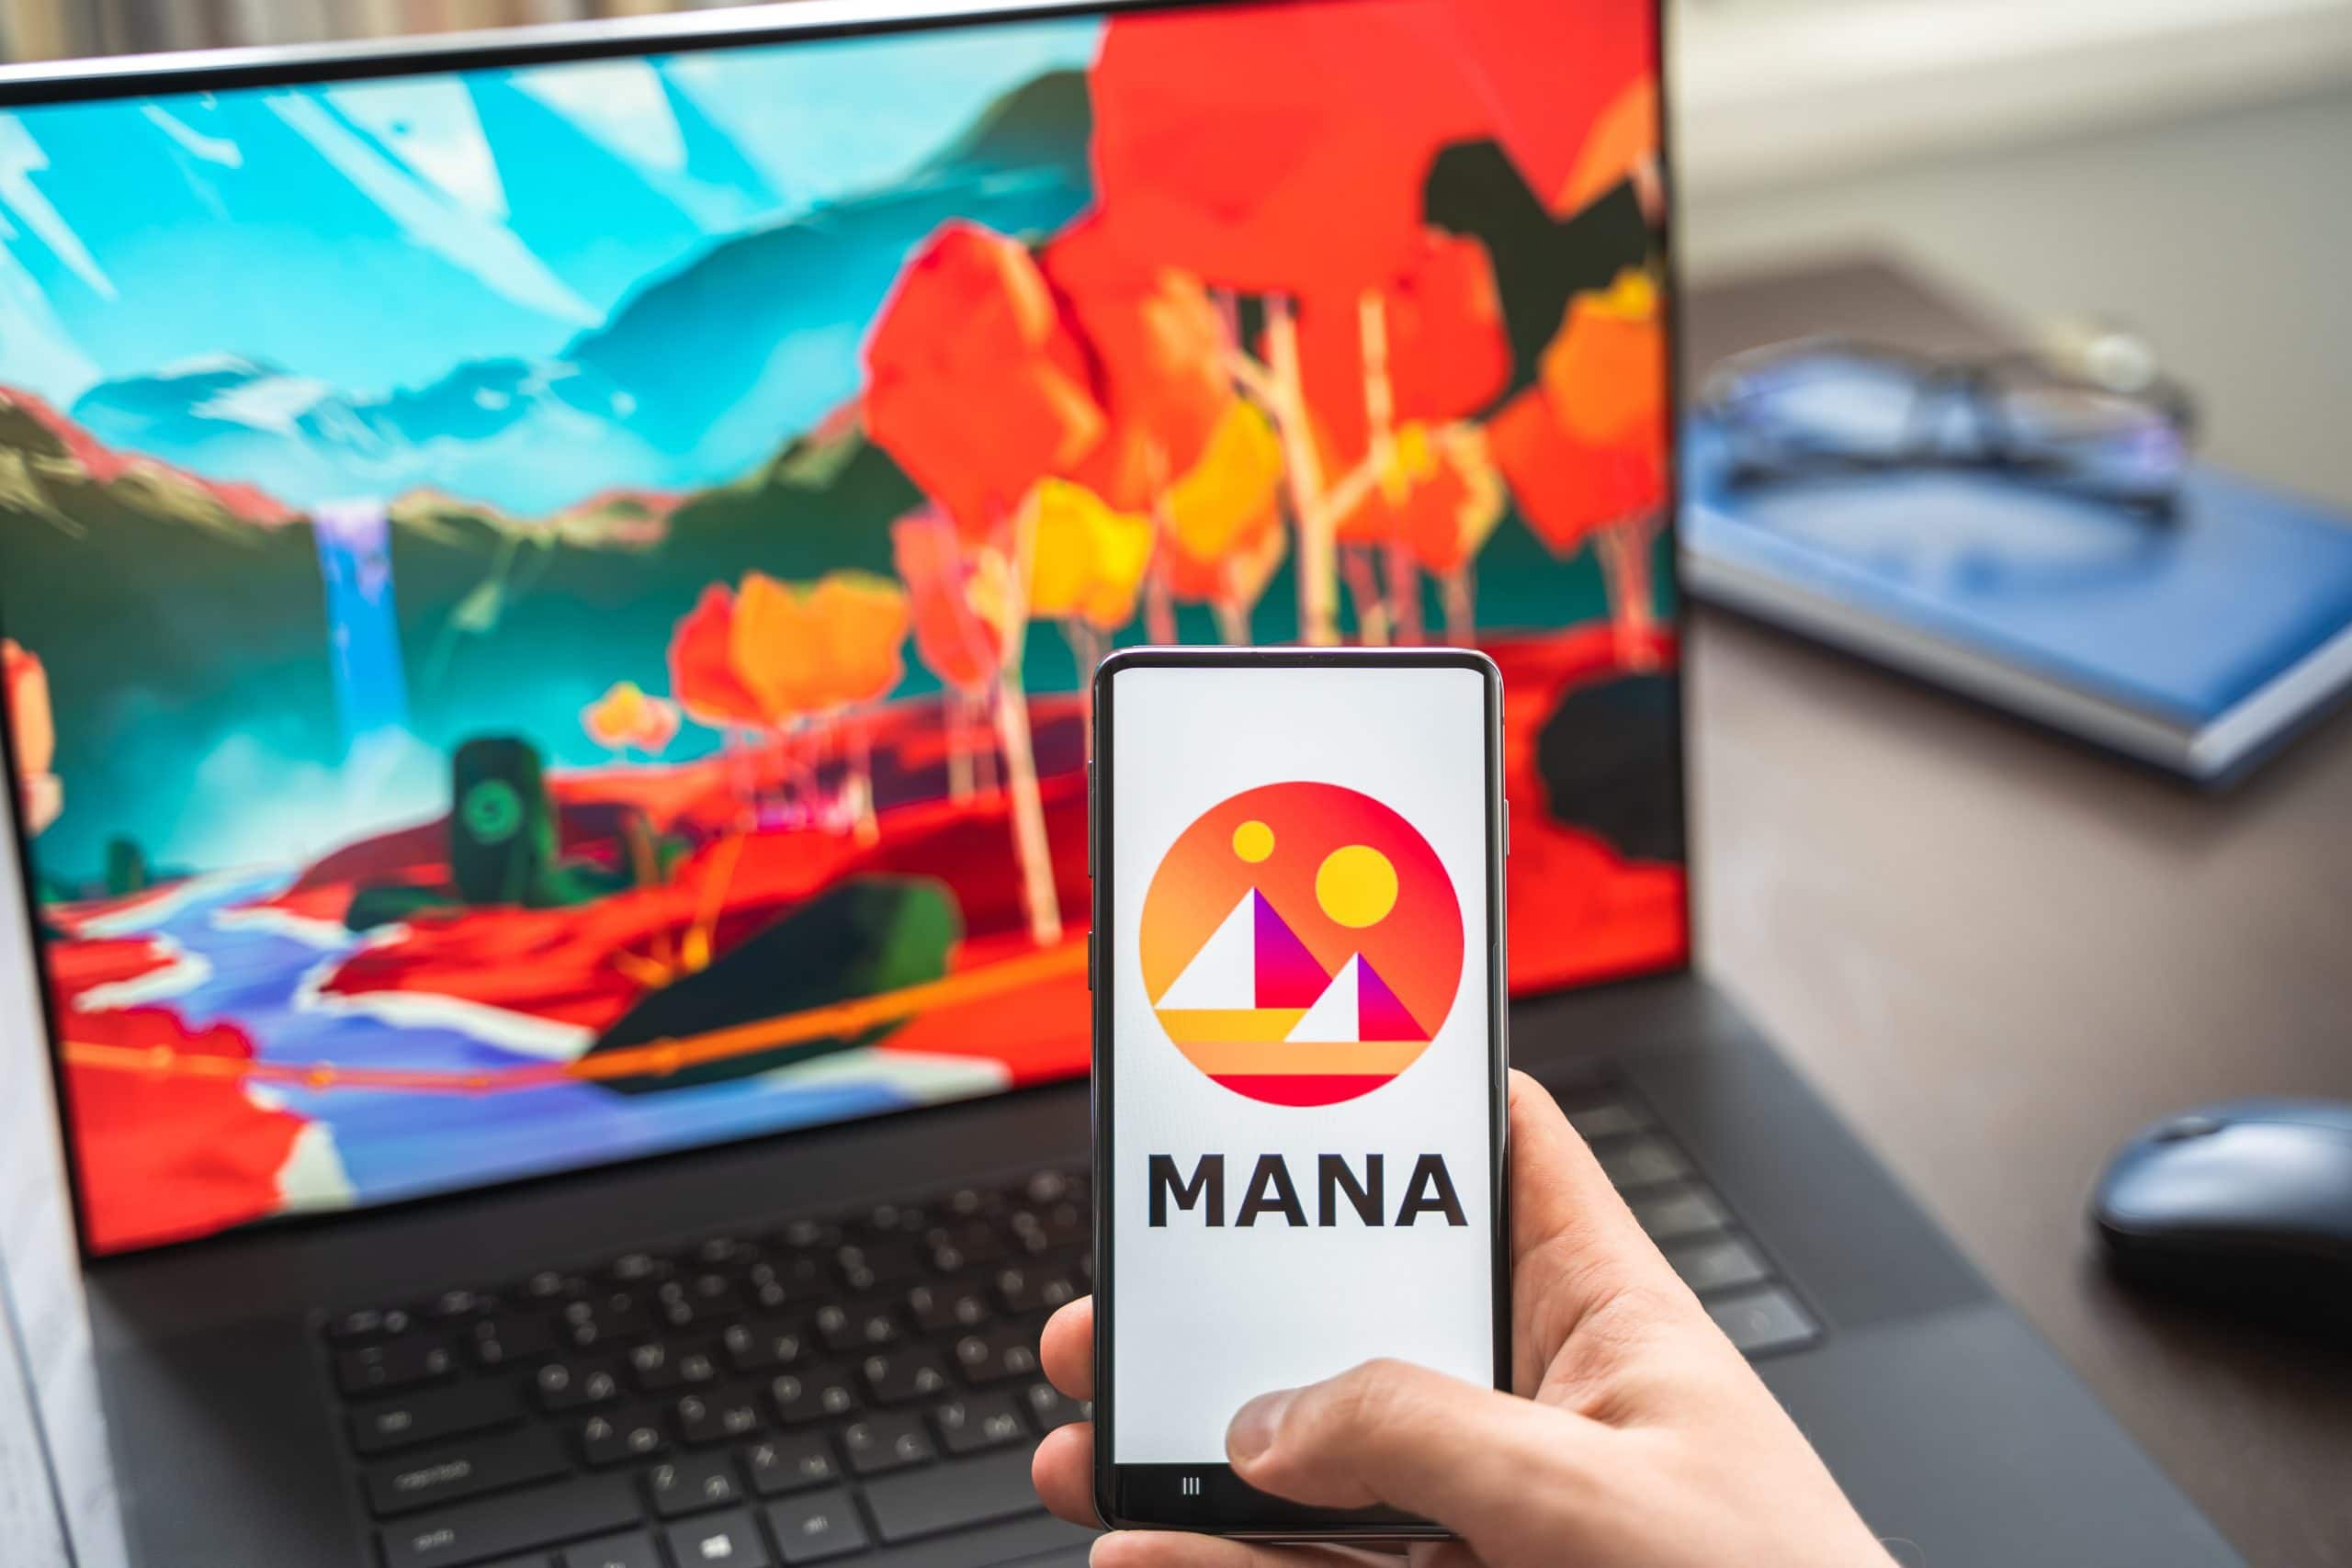 Facebook is now Meta and Decentraland (MANA) is taking off